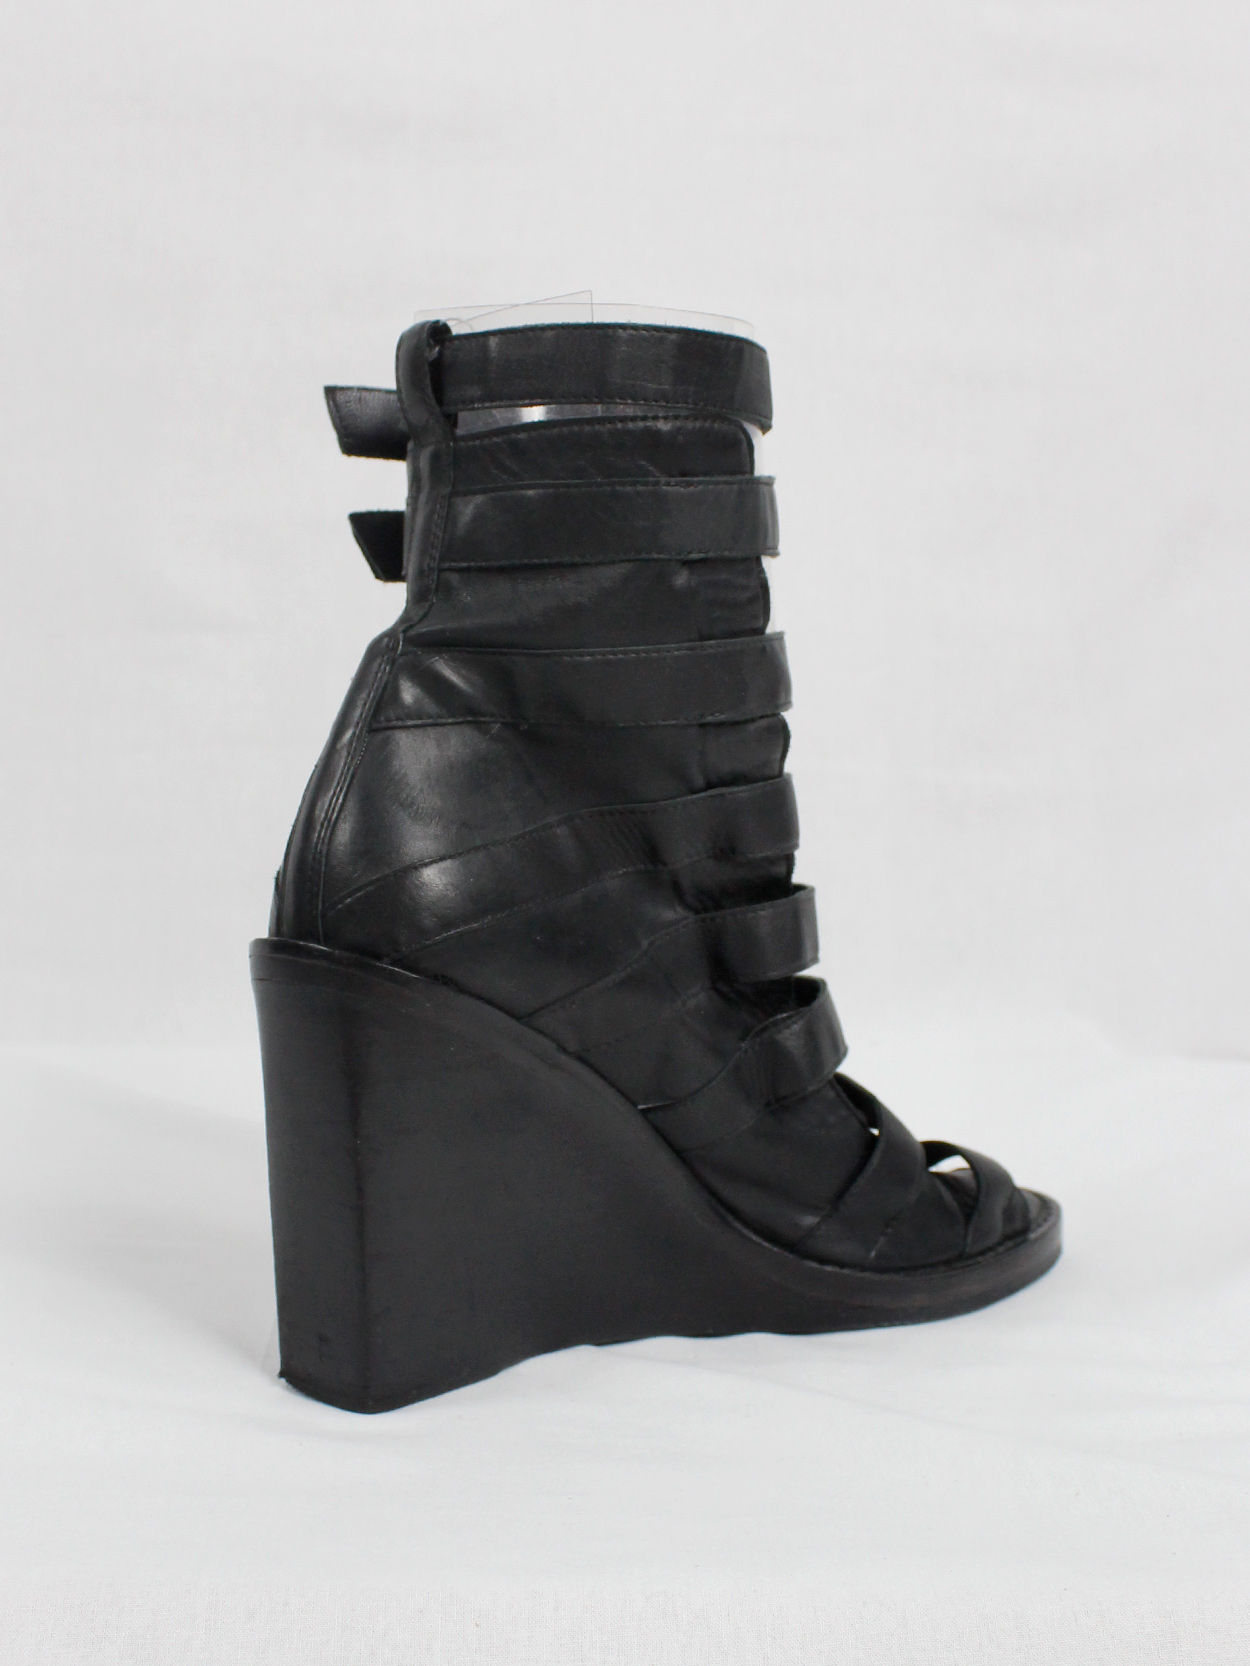 Ann Demeulemeester black wedge sandals with buckle belts Spring 2010 (6)